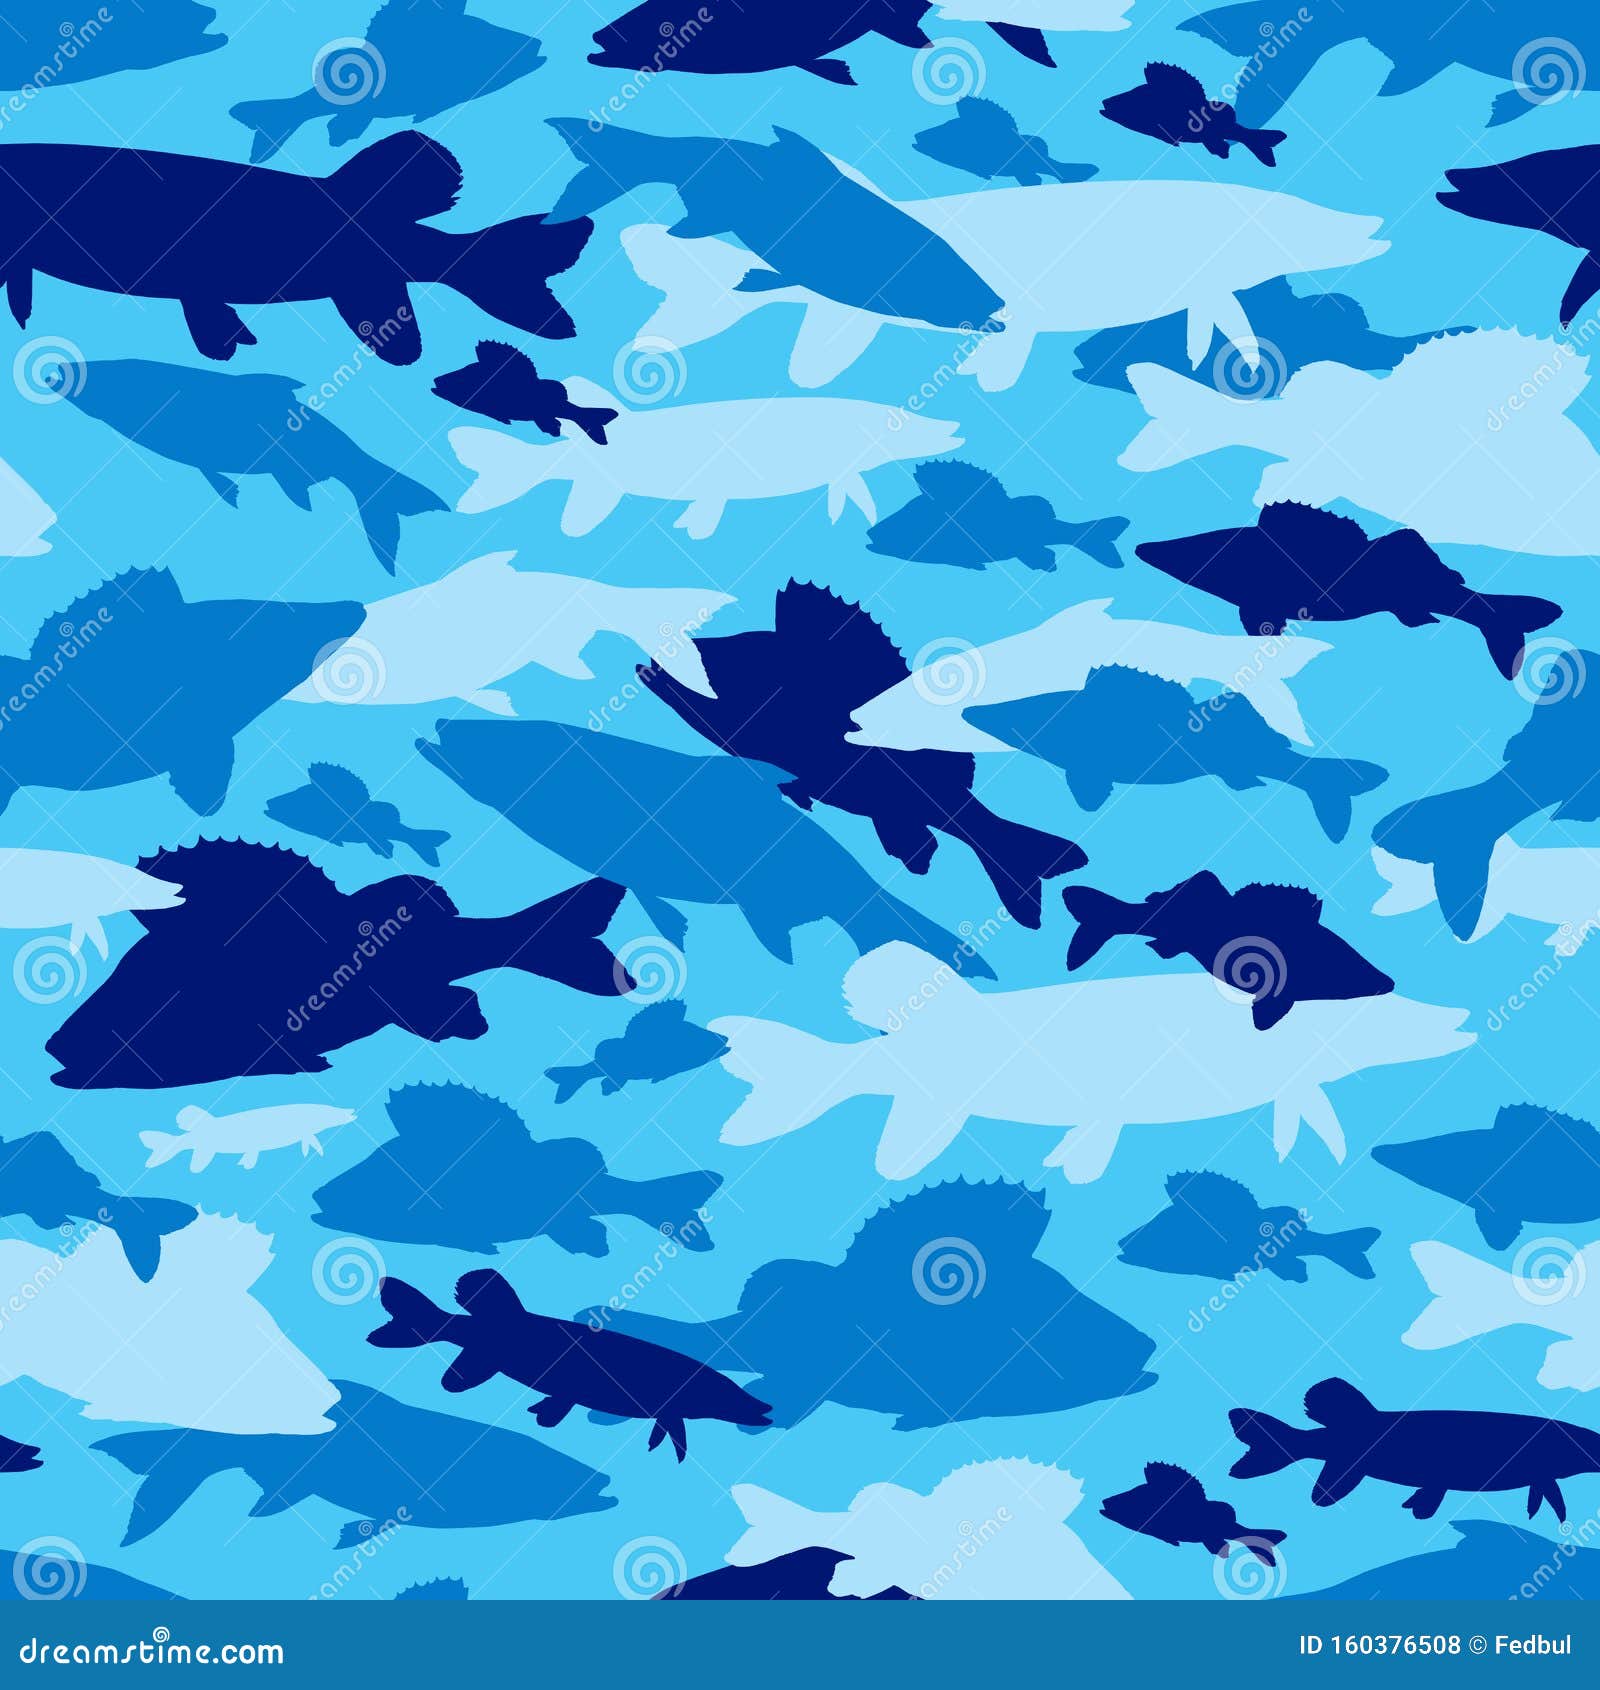 https://thumbs.dreamstime.com/z/seamless-pattern-fishing-camouflage-blue-camo-freshwater-fish-seamless-pattern-fishing-camouflage-blue-camo-freshwater-160376508.jpg